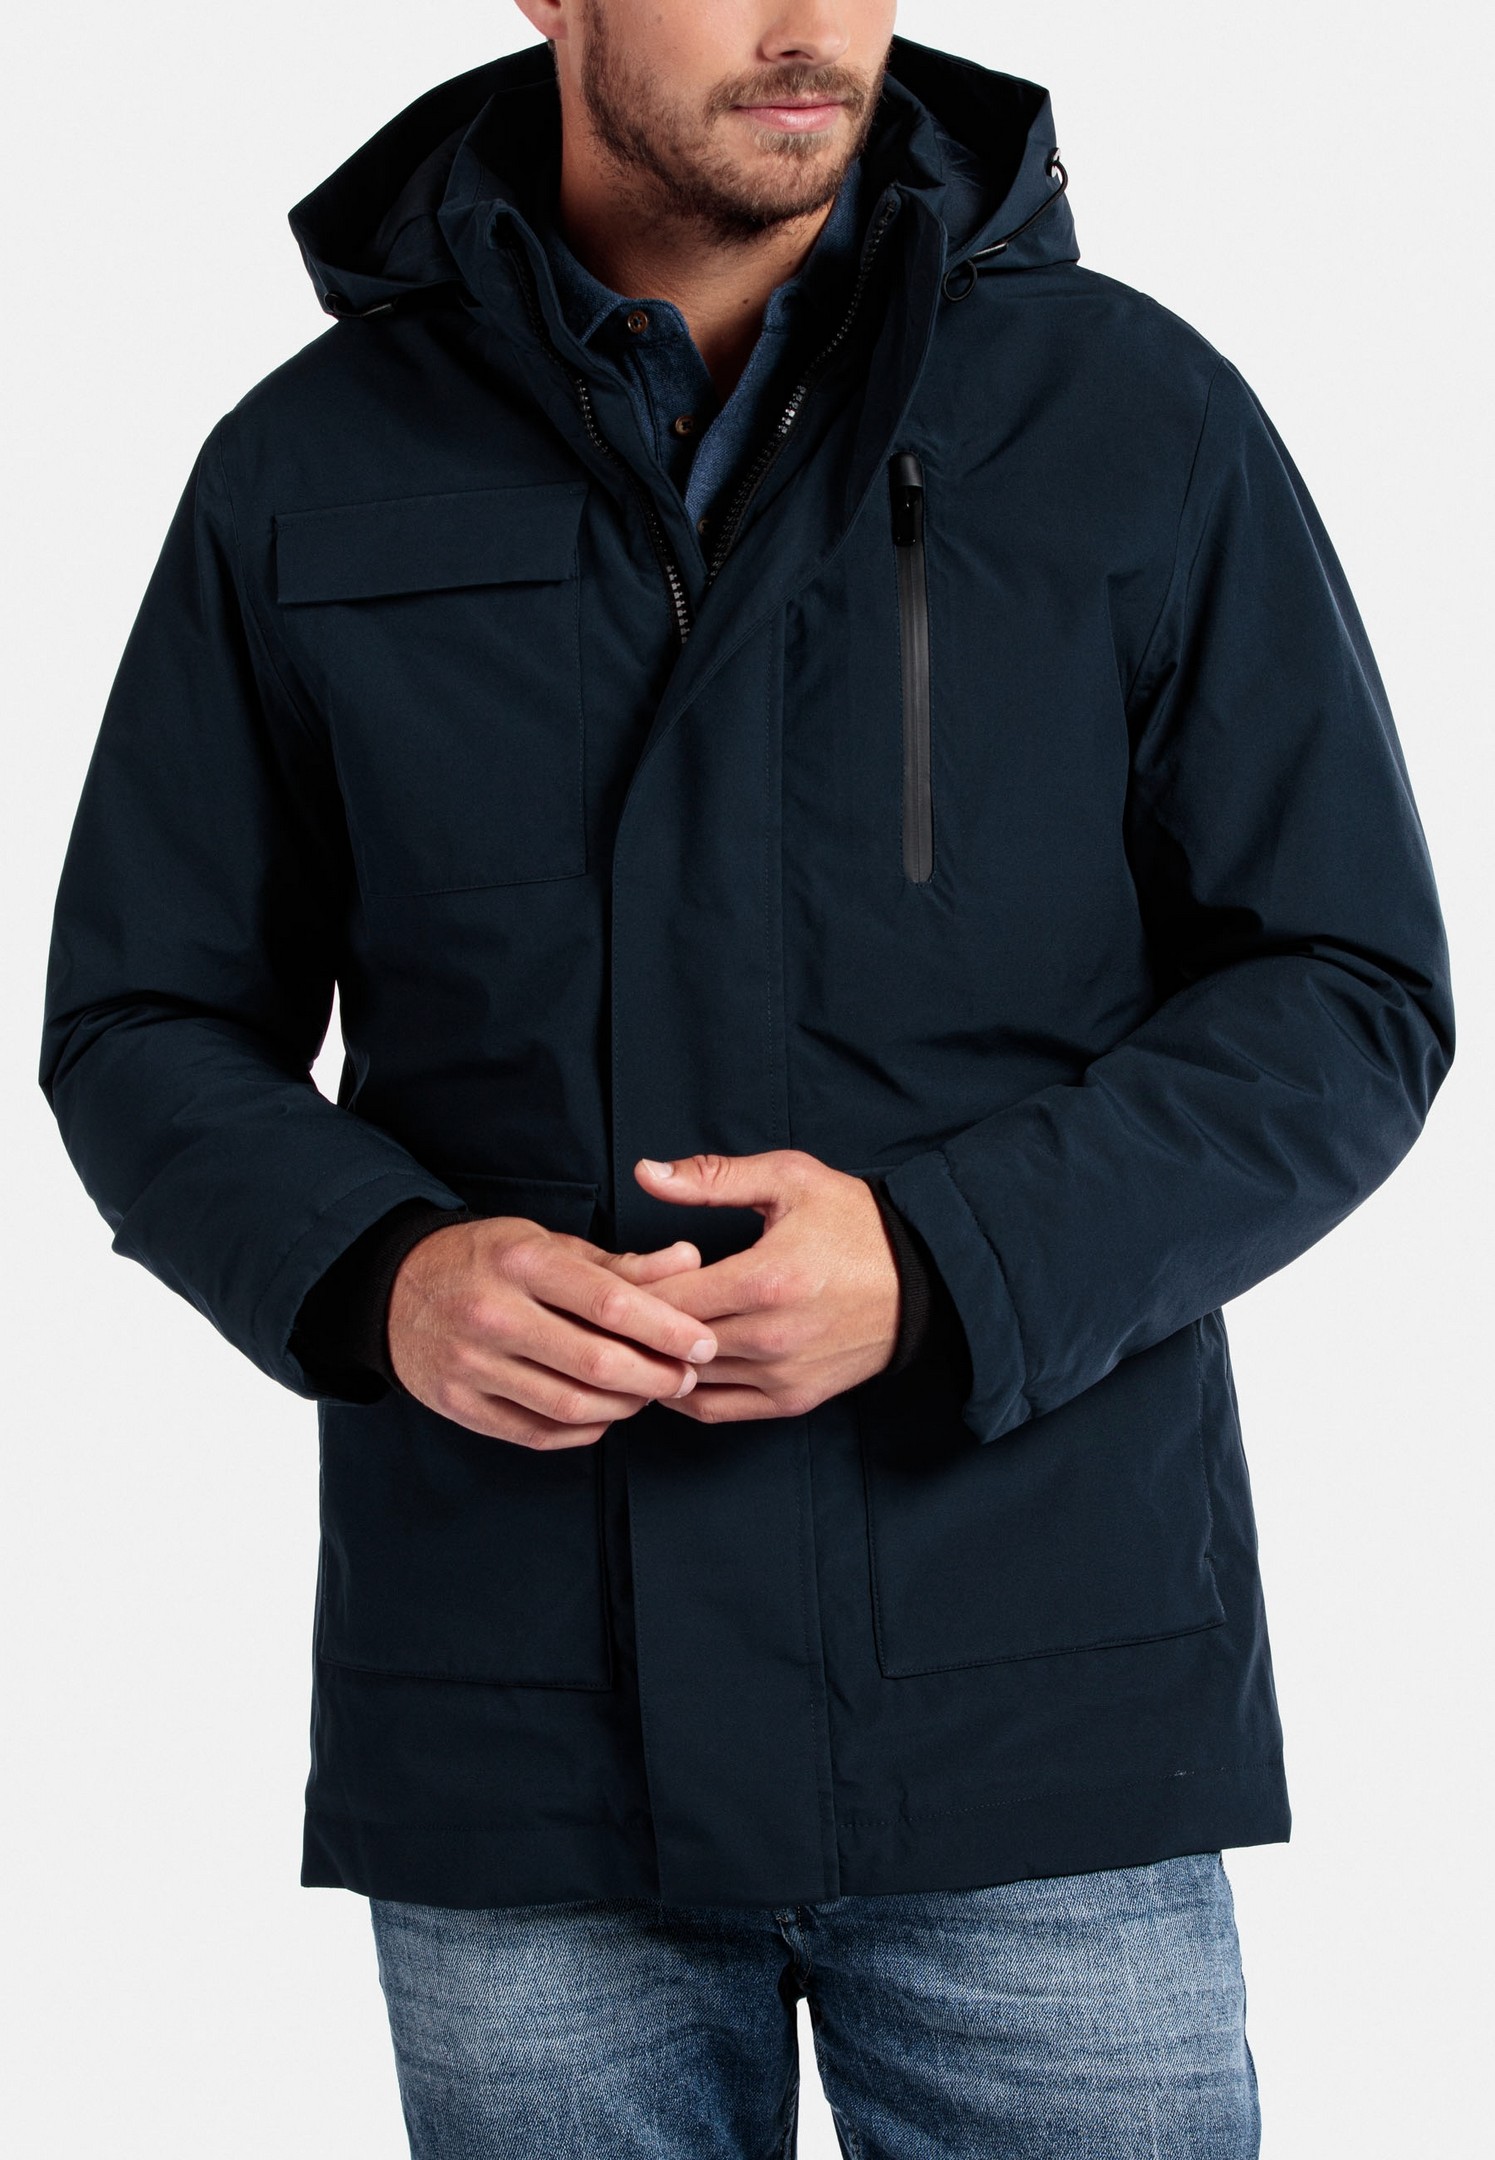 Giordano Jacket Removable Hood Water and Windproof Dark Navy | Jan Rozing  Men's Fashion